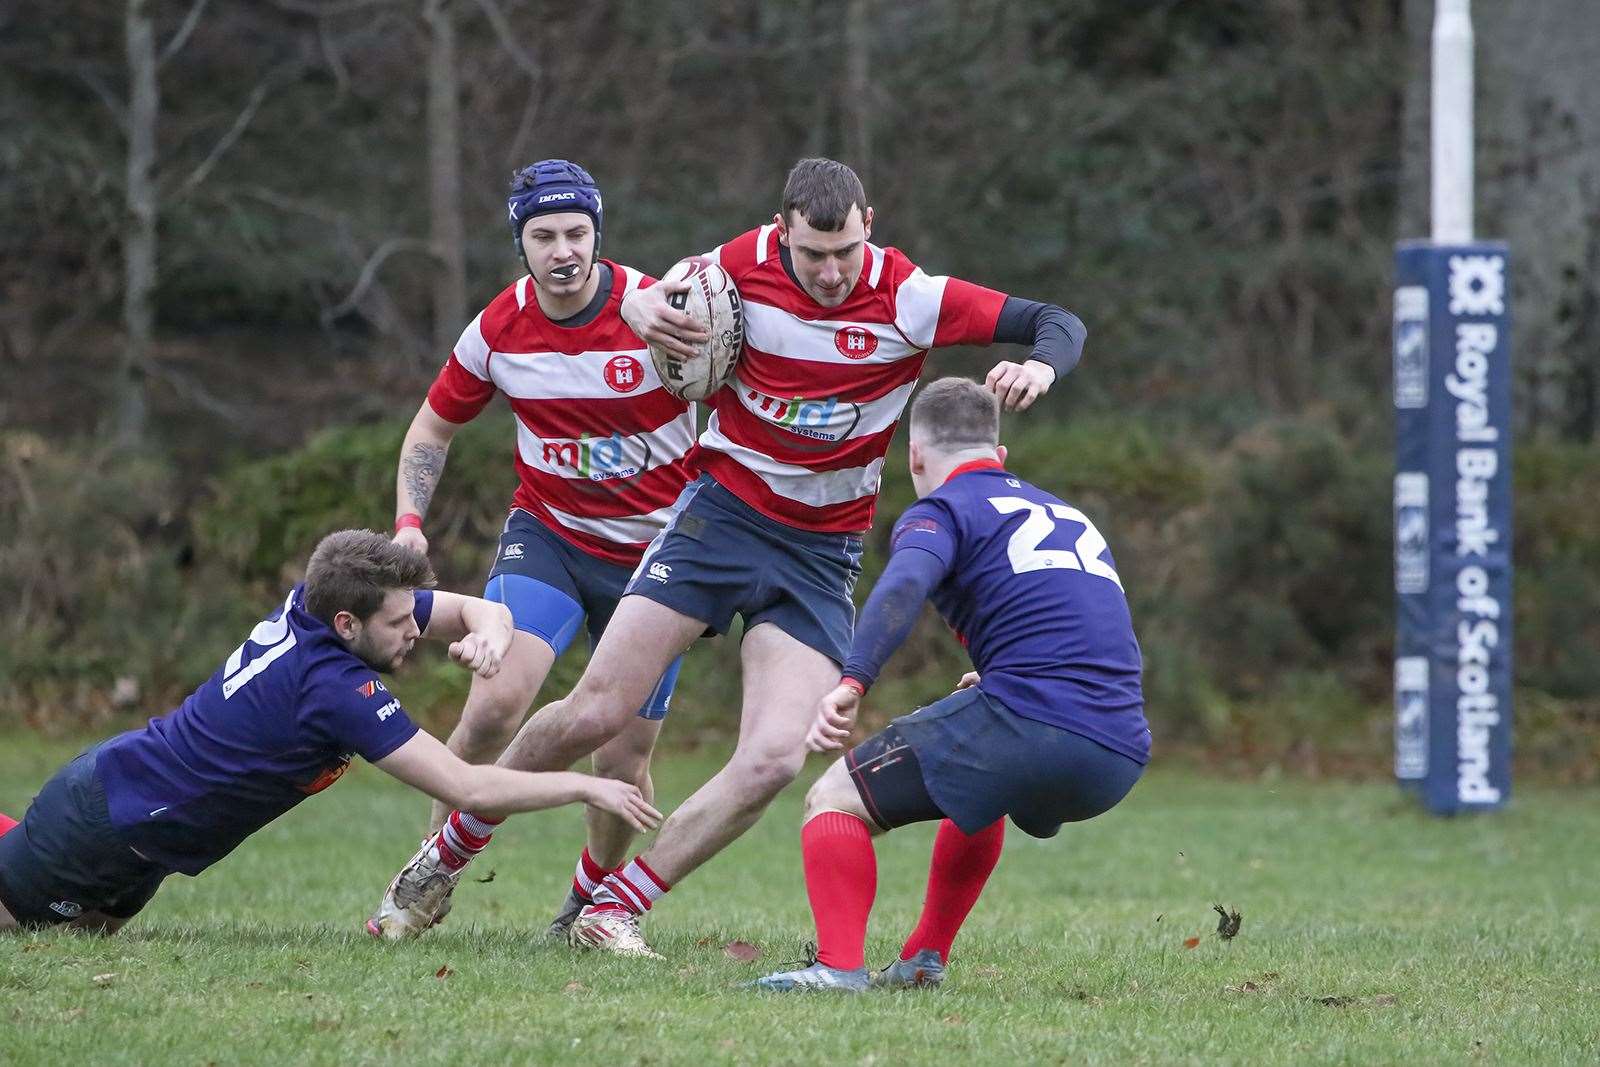 Archie Duncan trying to step past defenders. Connor McWilliam in background. Photo: John MacGregor